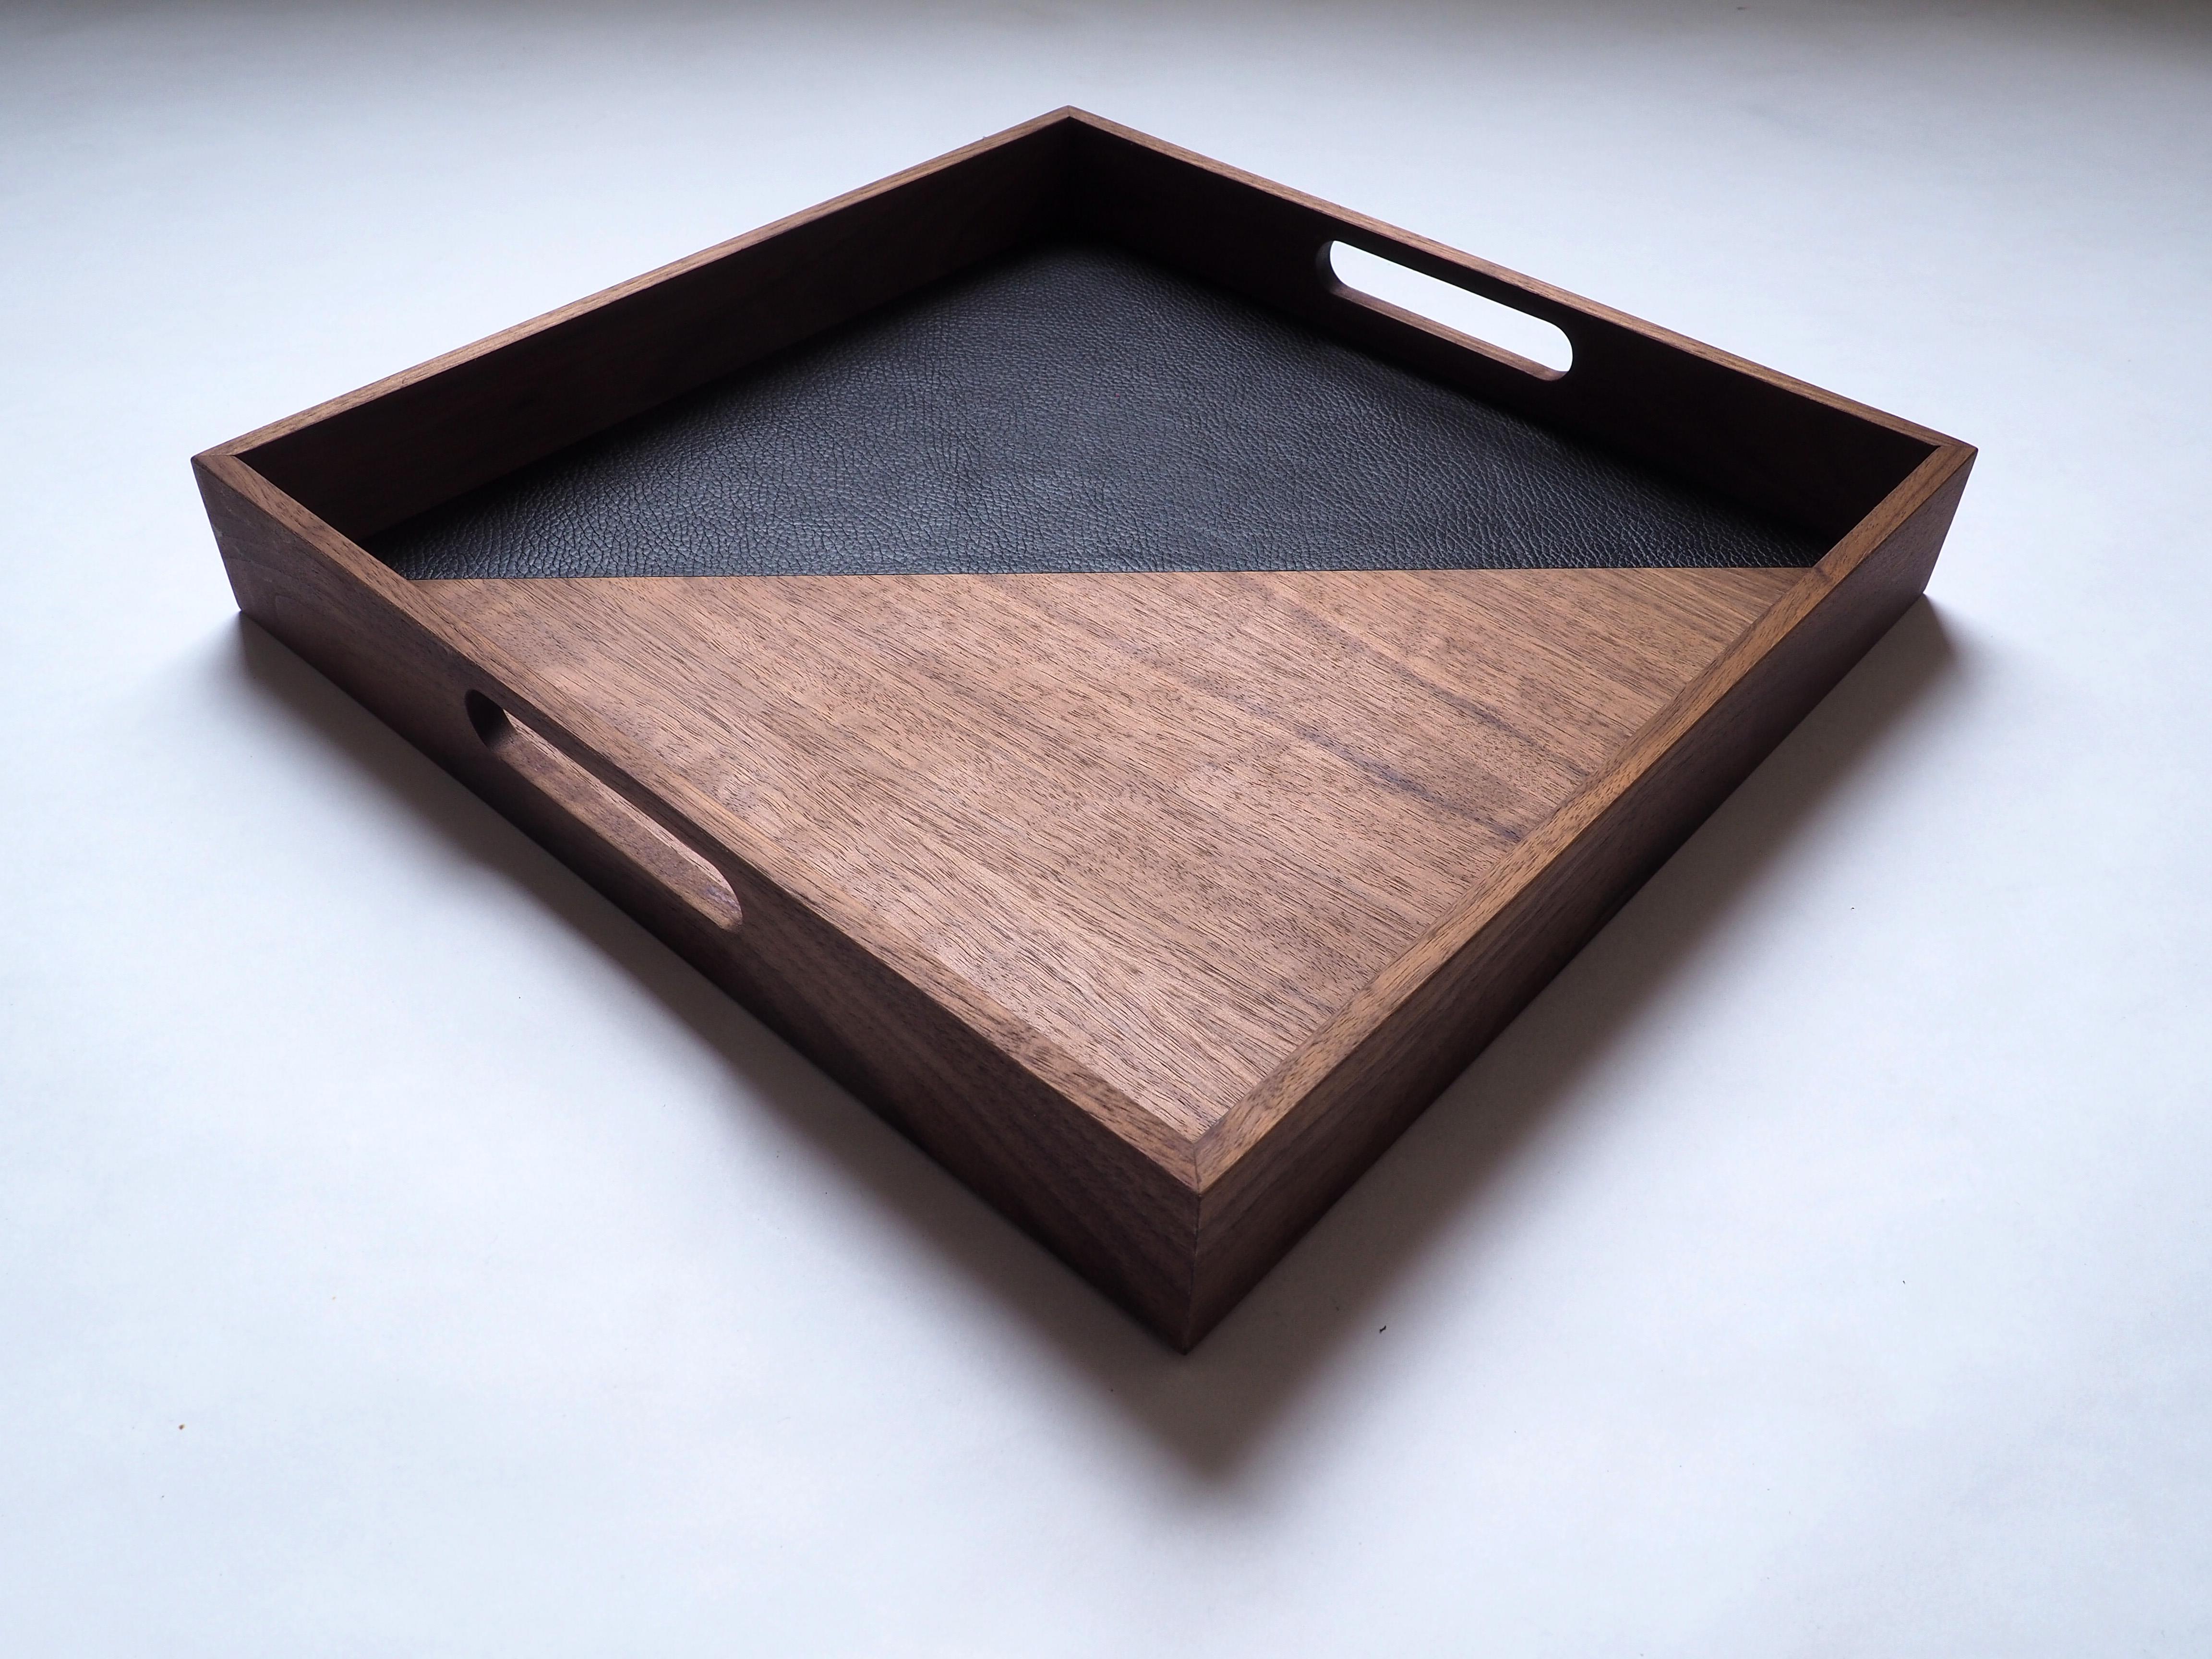 Handcrafted serving tray in walnut wood and black buffalo leather.  
It can be used both to serve tea and to display beautiful books on a coffee table. 
A must-have !

The junction between leather and wood is flush and invisible.
The blend of wood